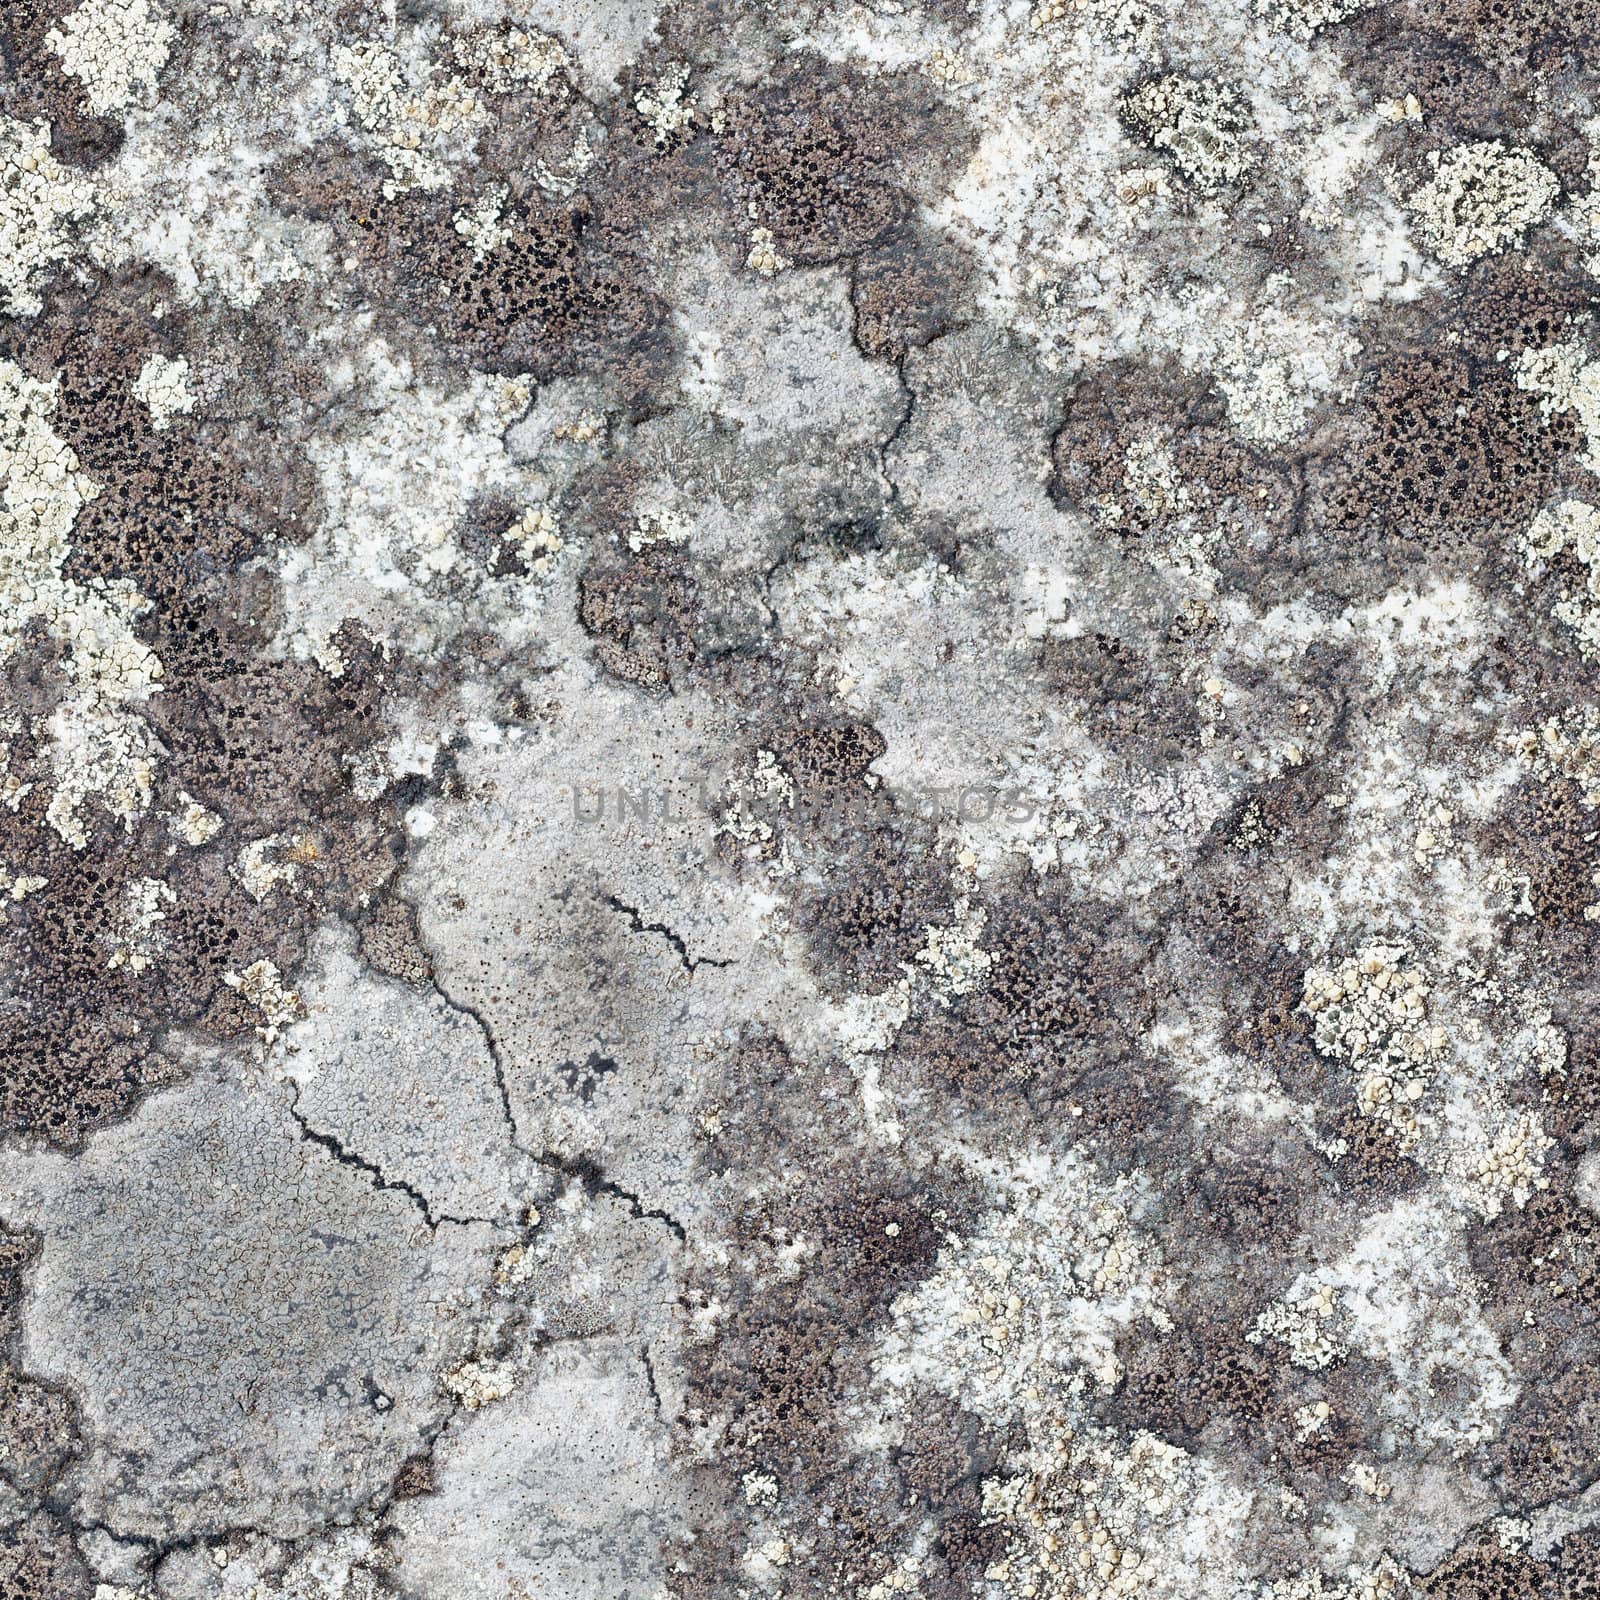 Surface of the granite rock covered with lichen - seamless texture